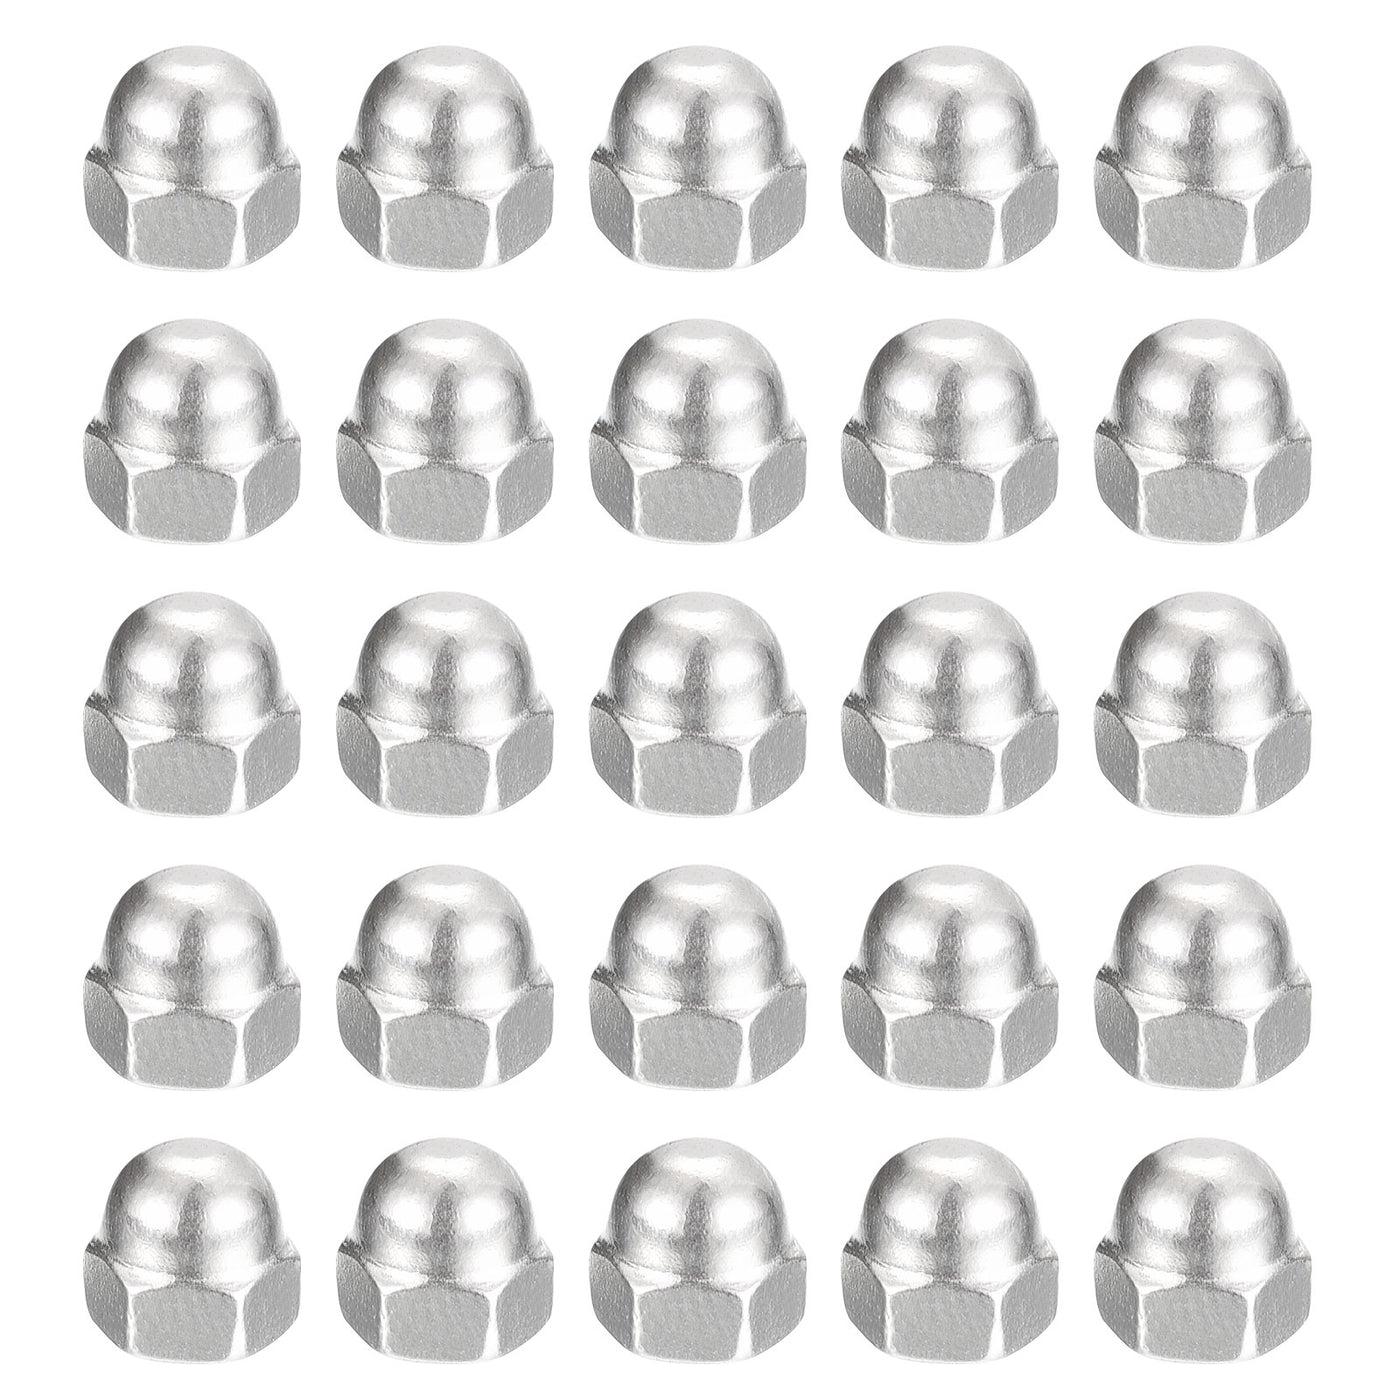 uxcell Uxcell #6-32 Acorn Cap Nuts,50pcs - 304 Stainless Steel Hardware Nuts, Acorn Hex Cap Dome Head Nuts for Fasteners (Silver)